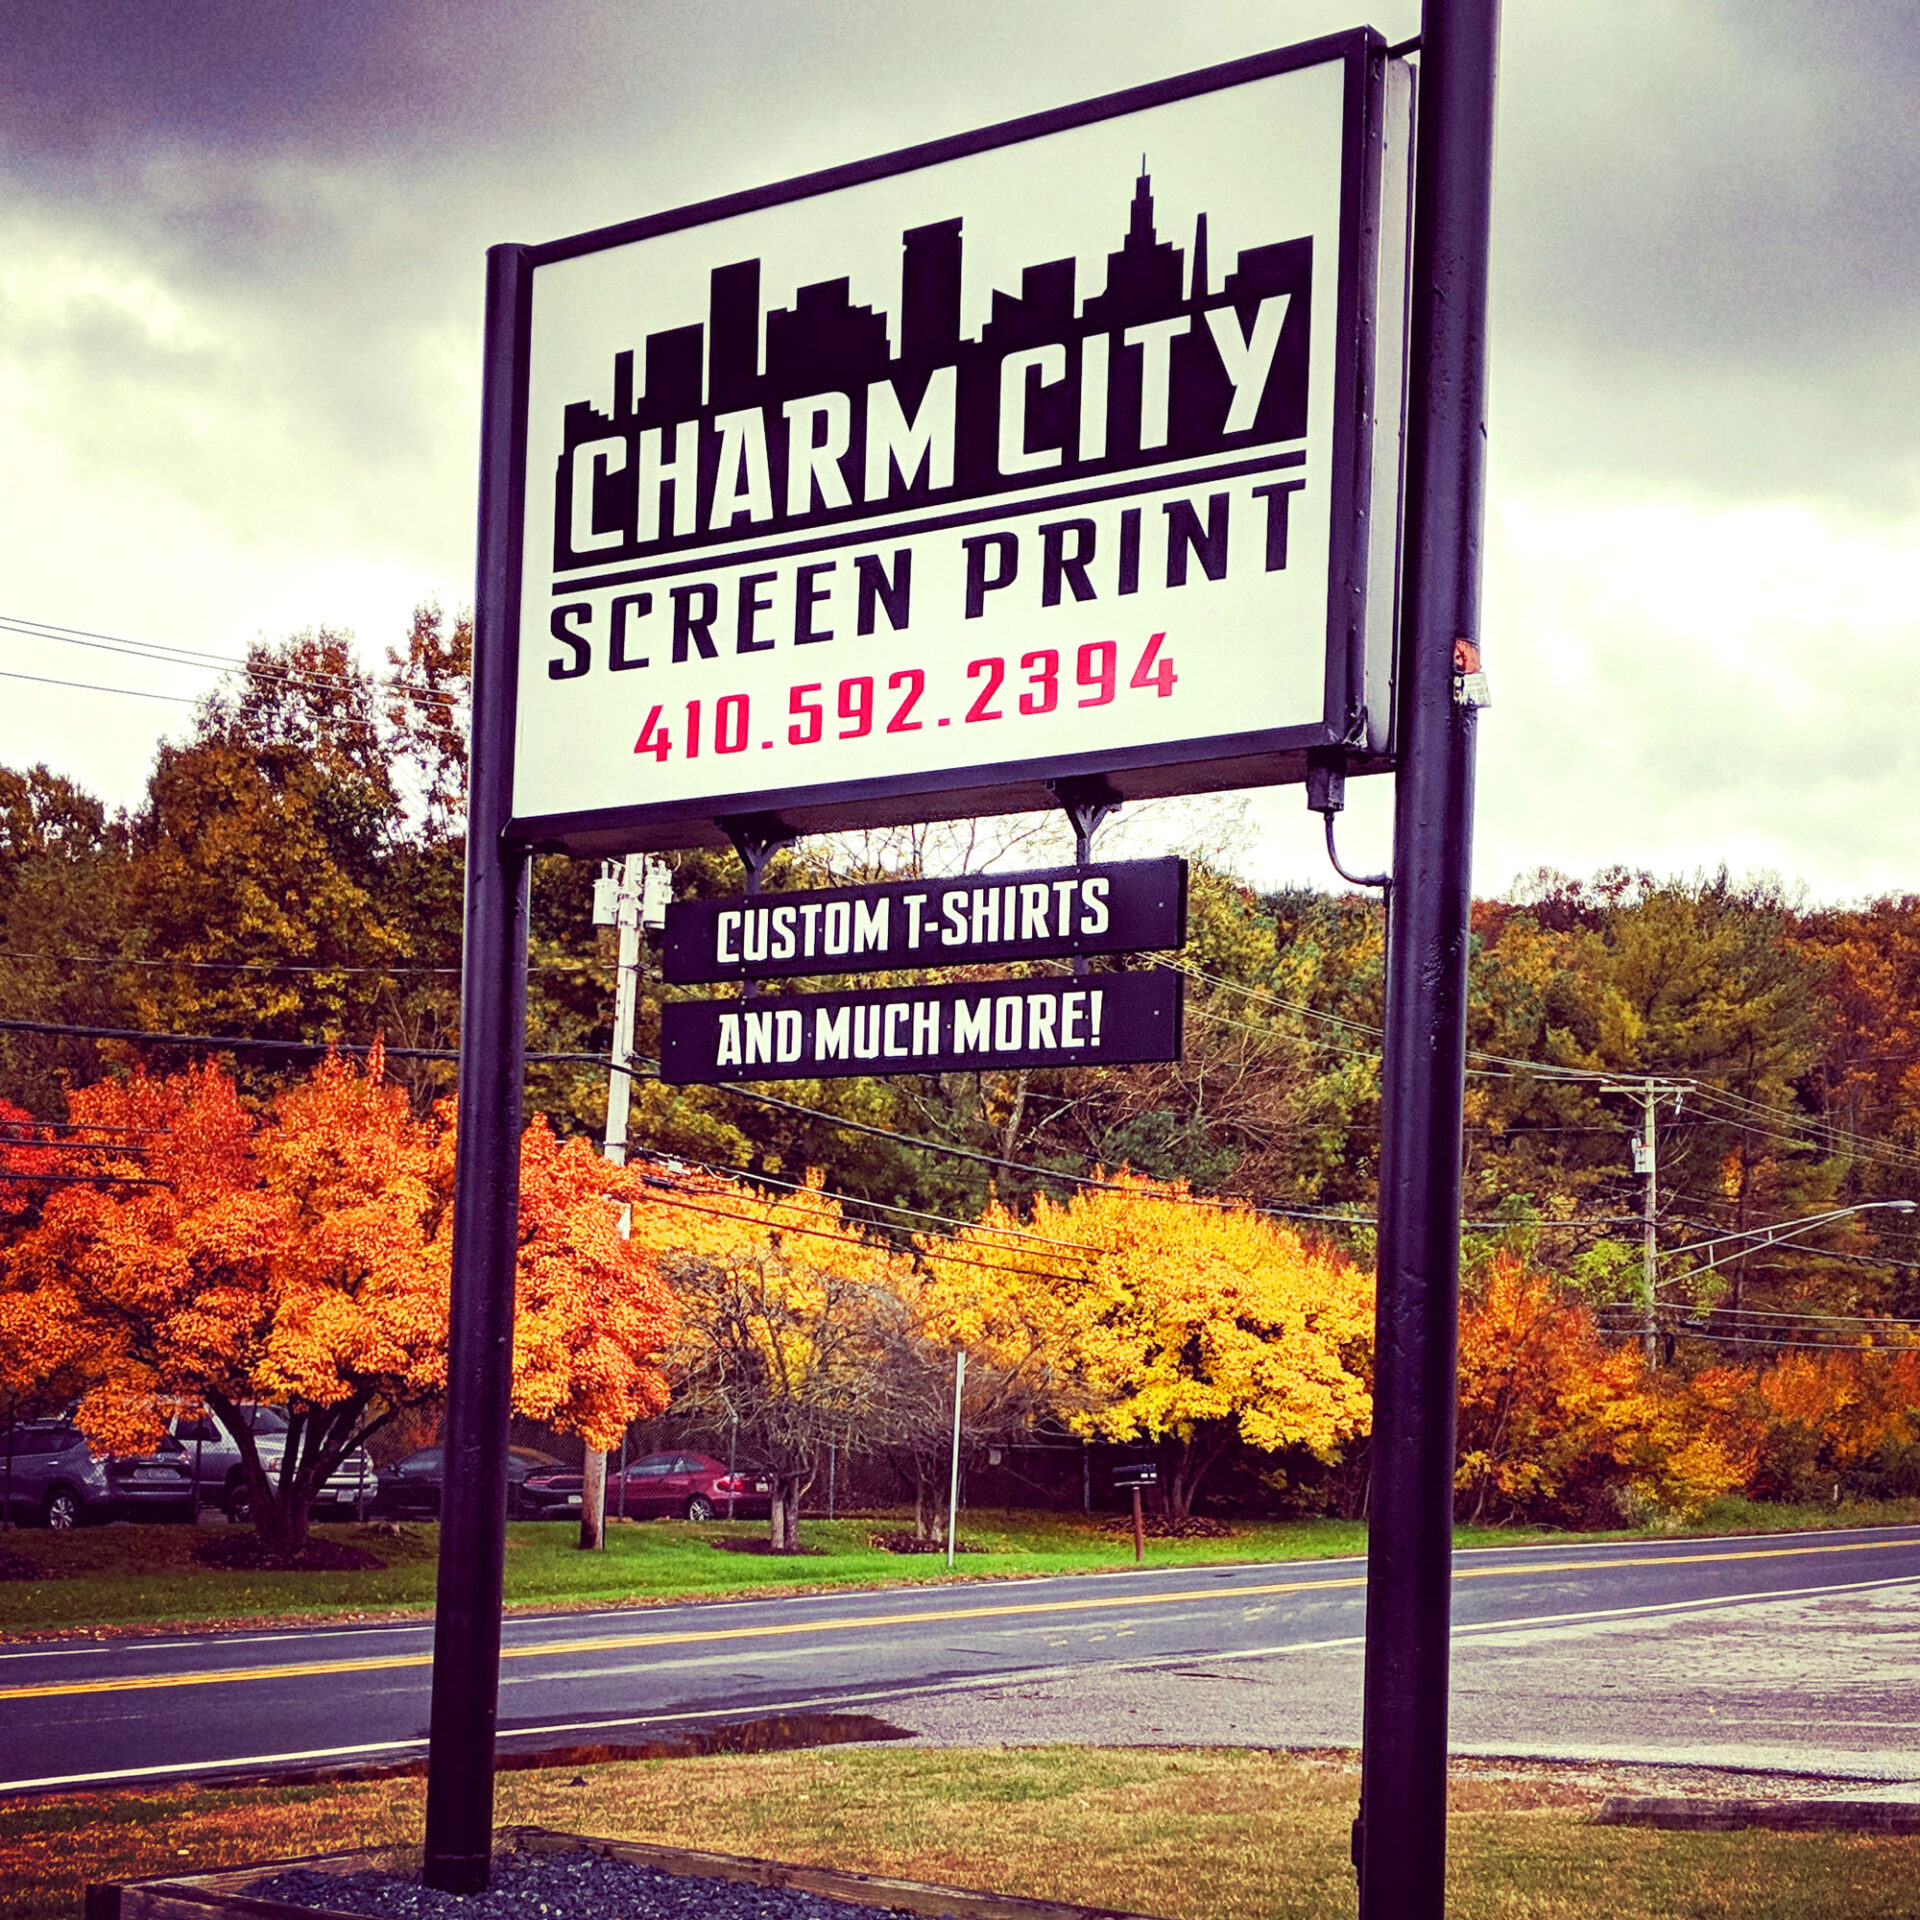 Vignette shot of the Charm City Screen Print outdoor sign next to a two-lane road